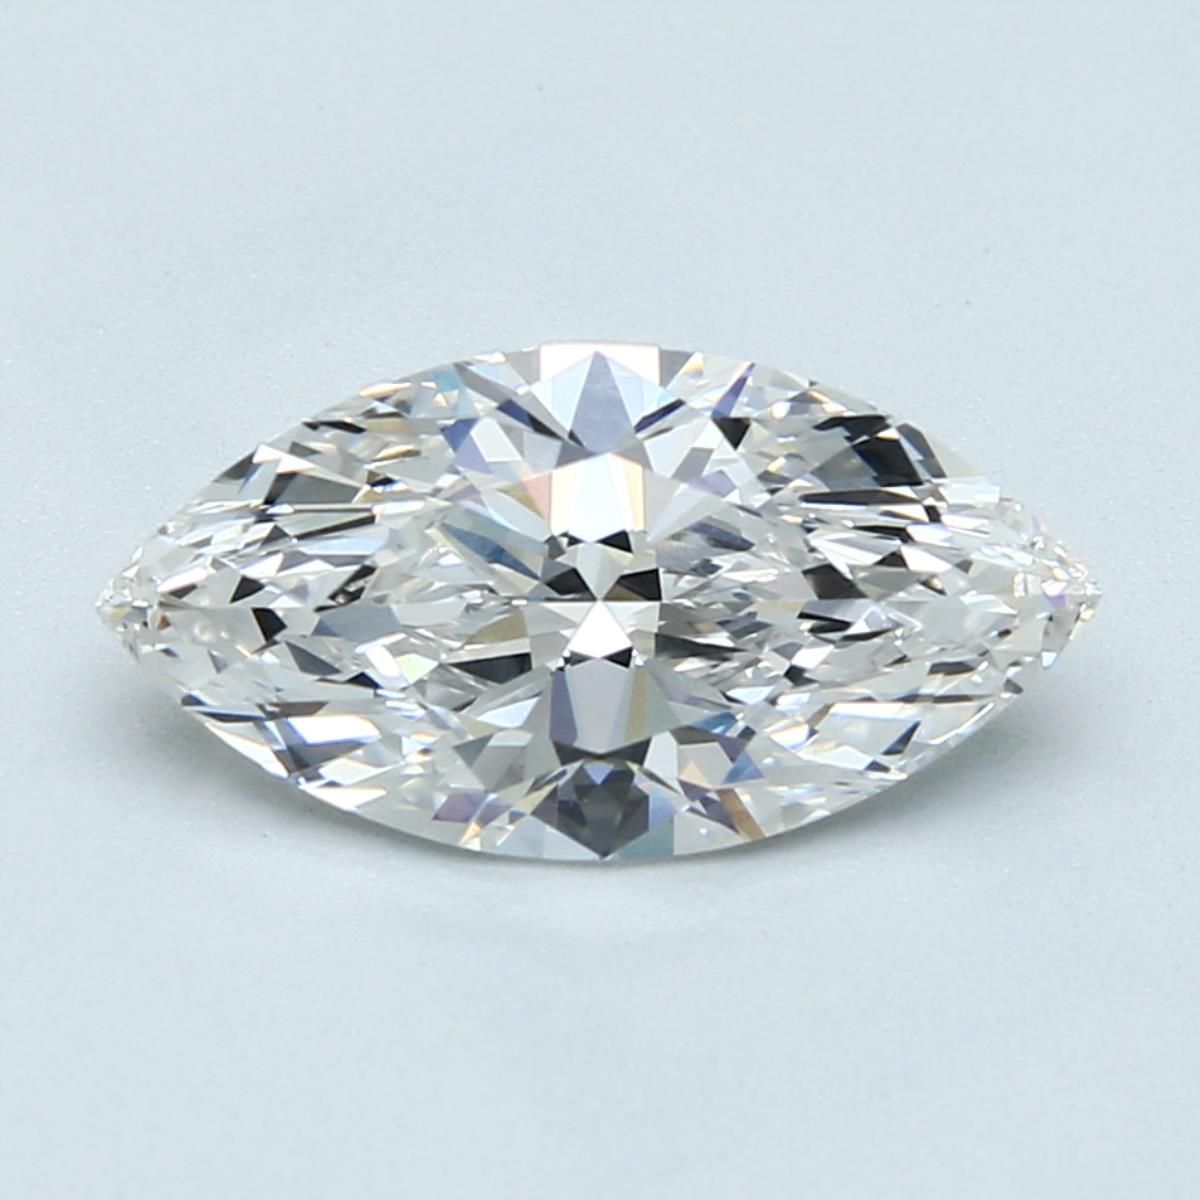 2.06 Carat Marquise Loose Diamond, G, VVS2, Super Ideal, GIA Certified